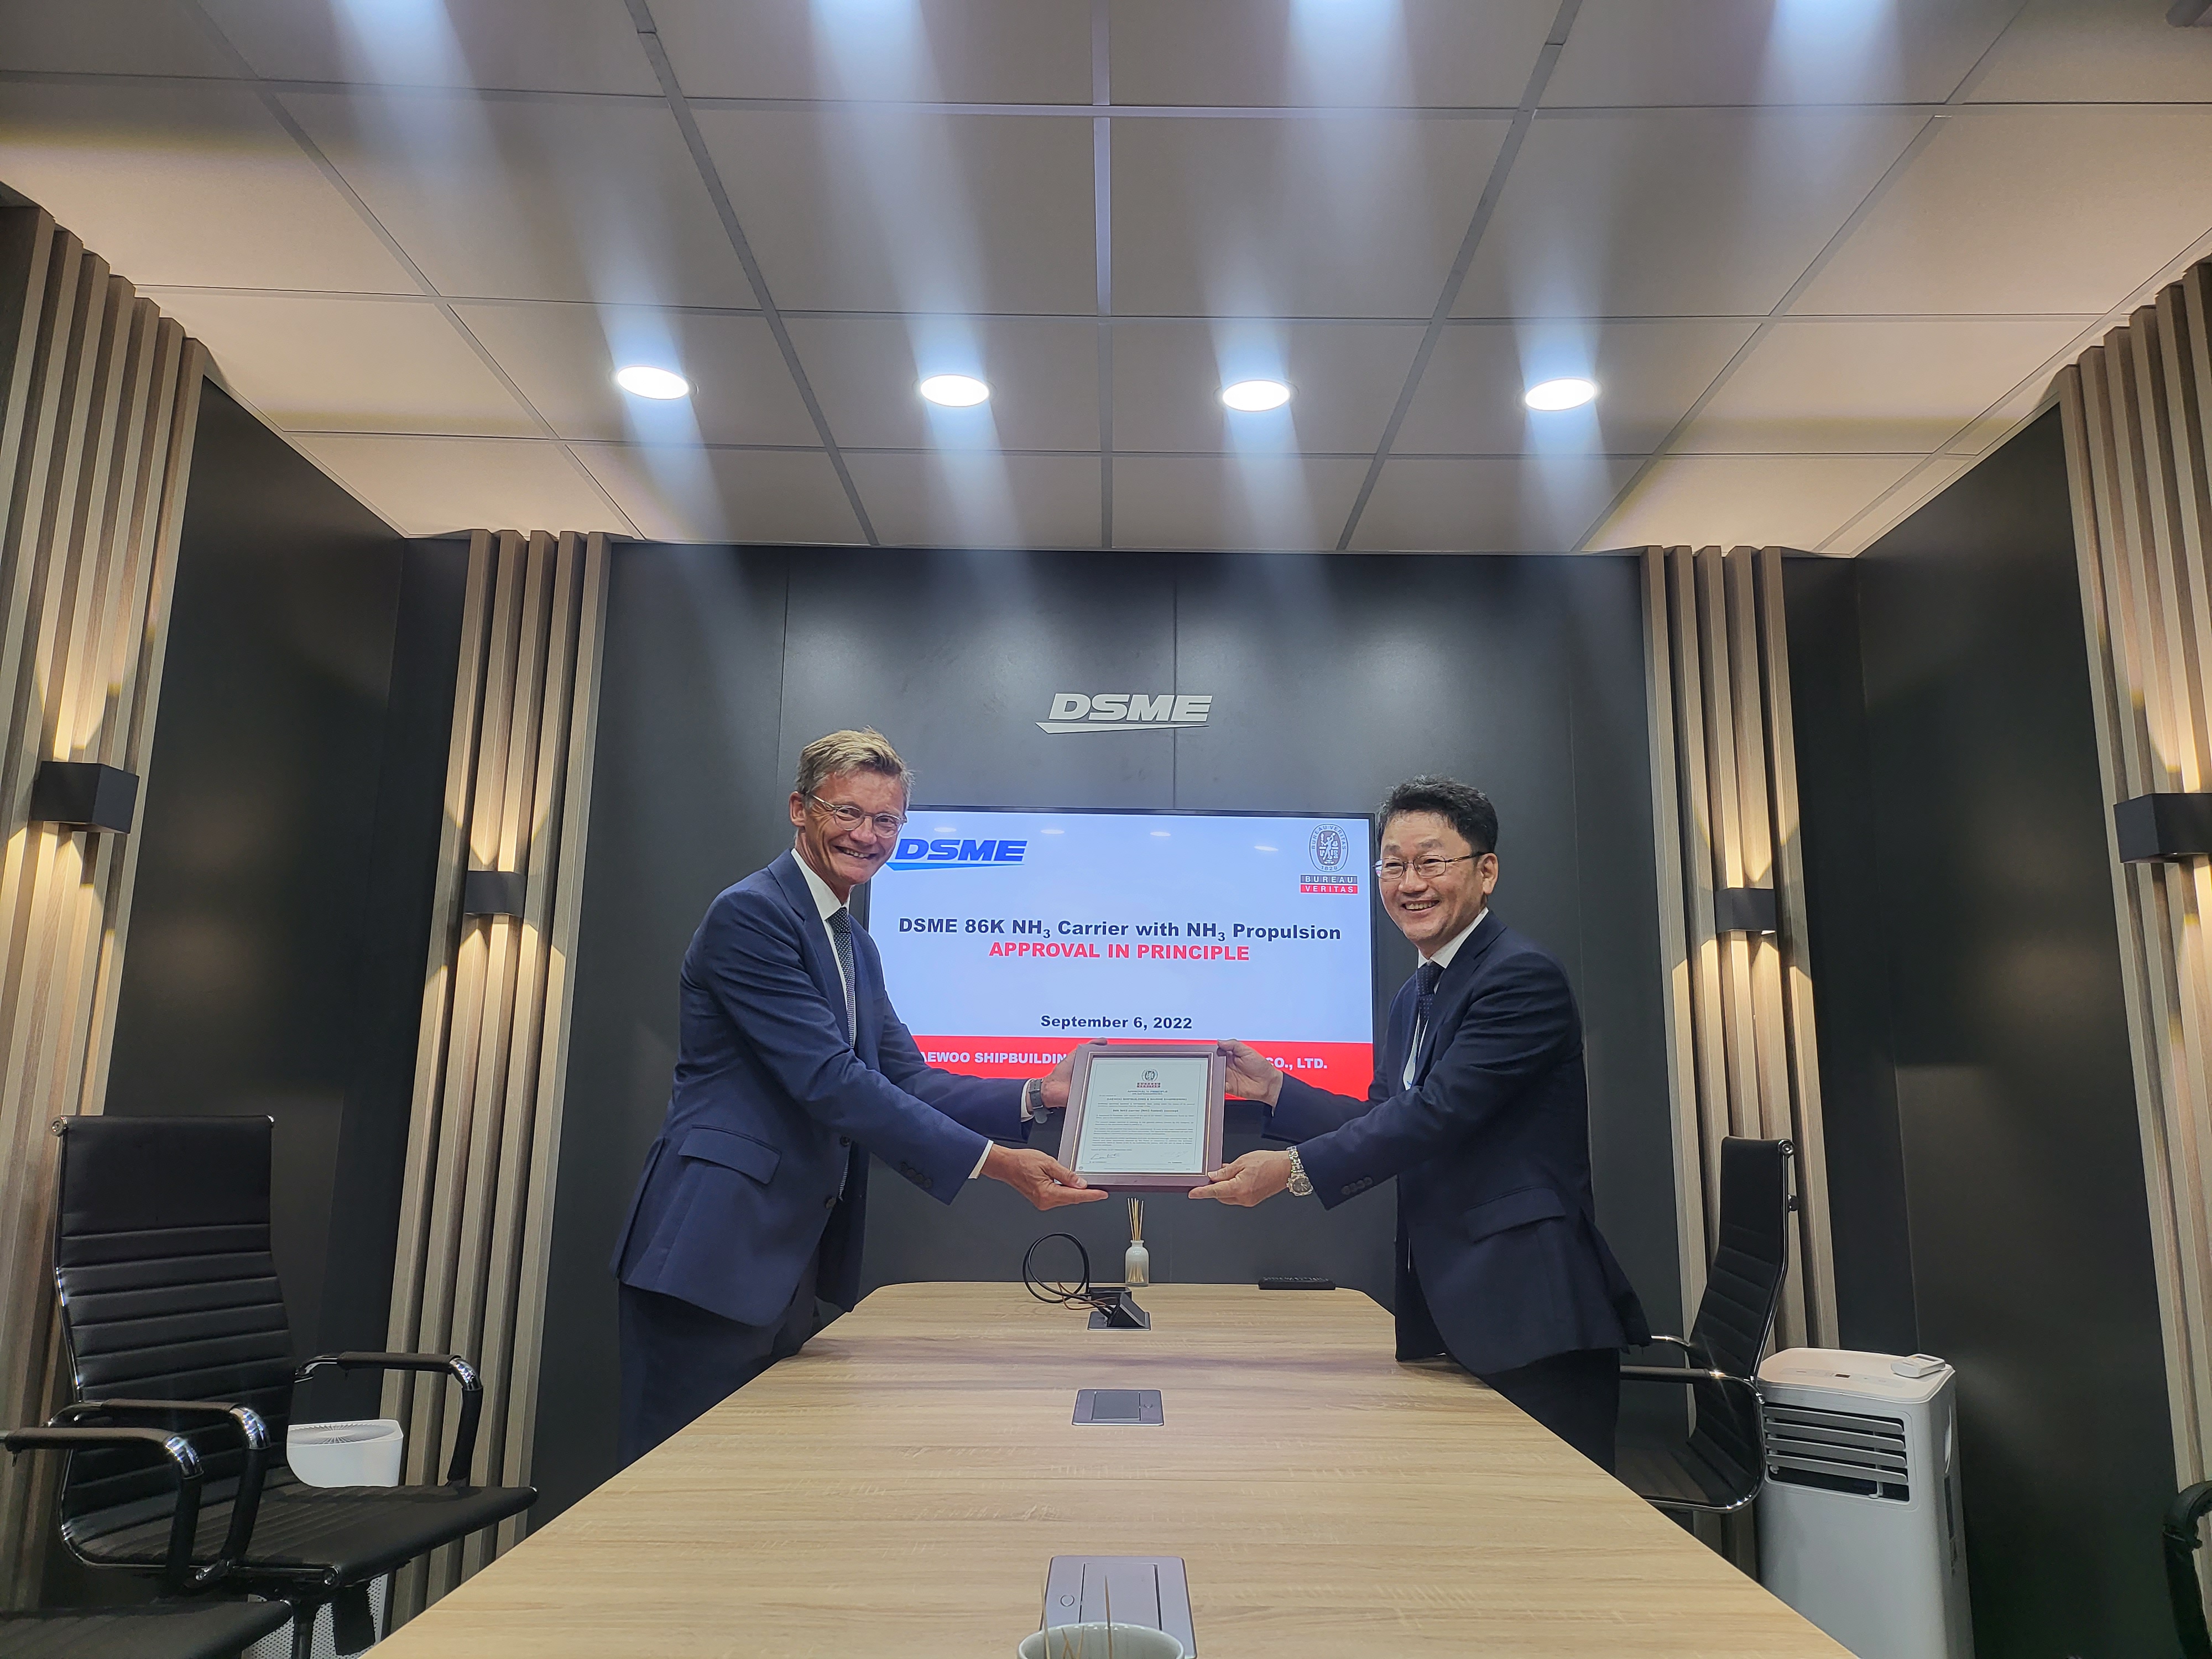 DSME receives Approval in Principle for 86K Ammonia Carrier with Ammonia Propulsion